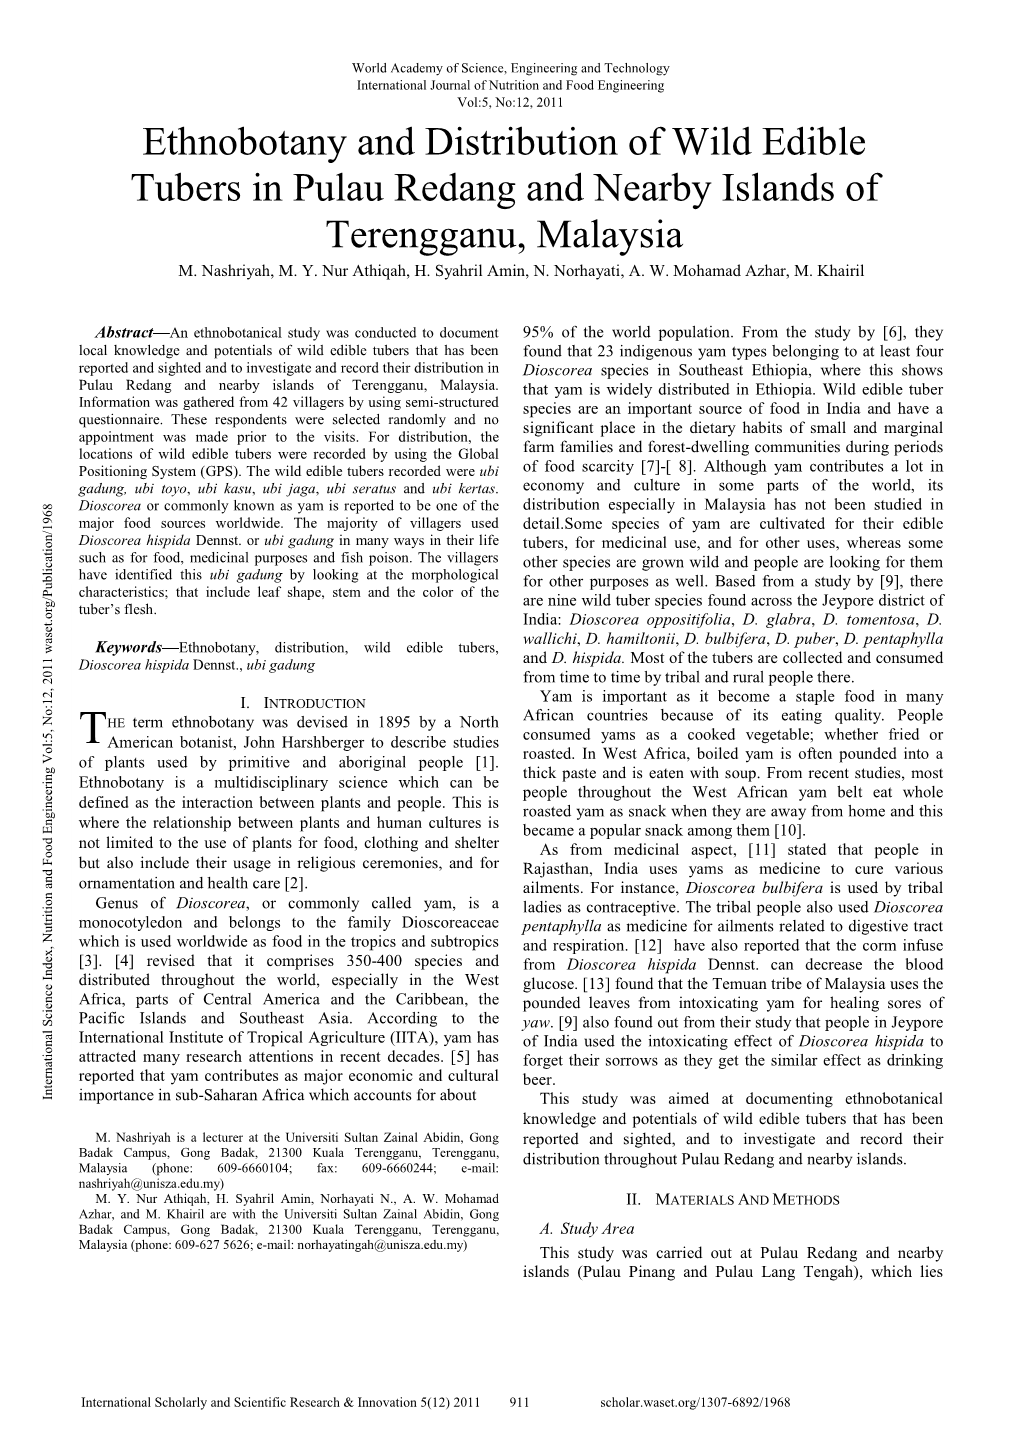 Ethnobotany and Distribution of Wild Edible Tubers in Pulau Redang and Nearby Islands of Terengganu, Malaysia M